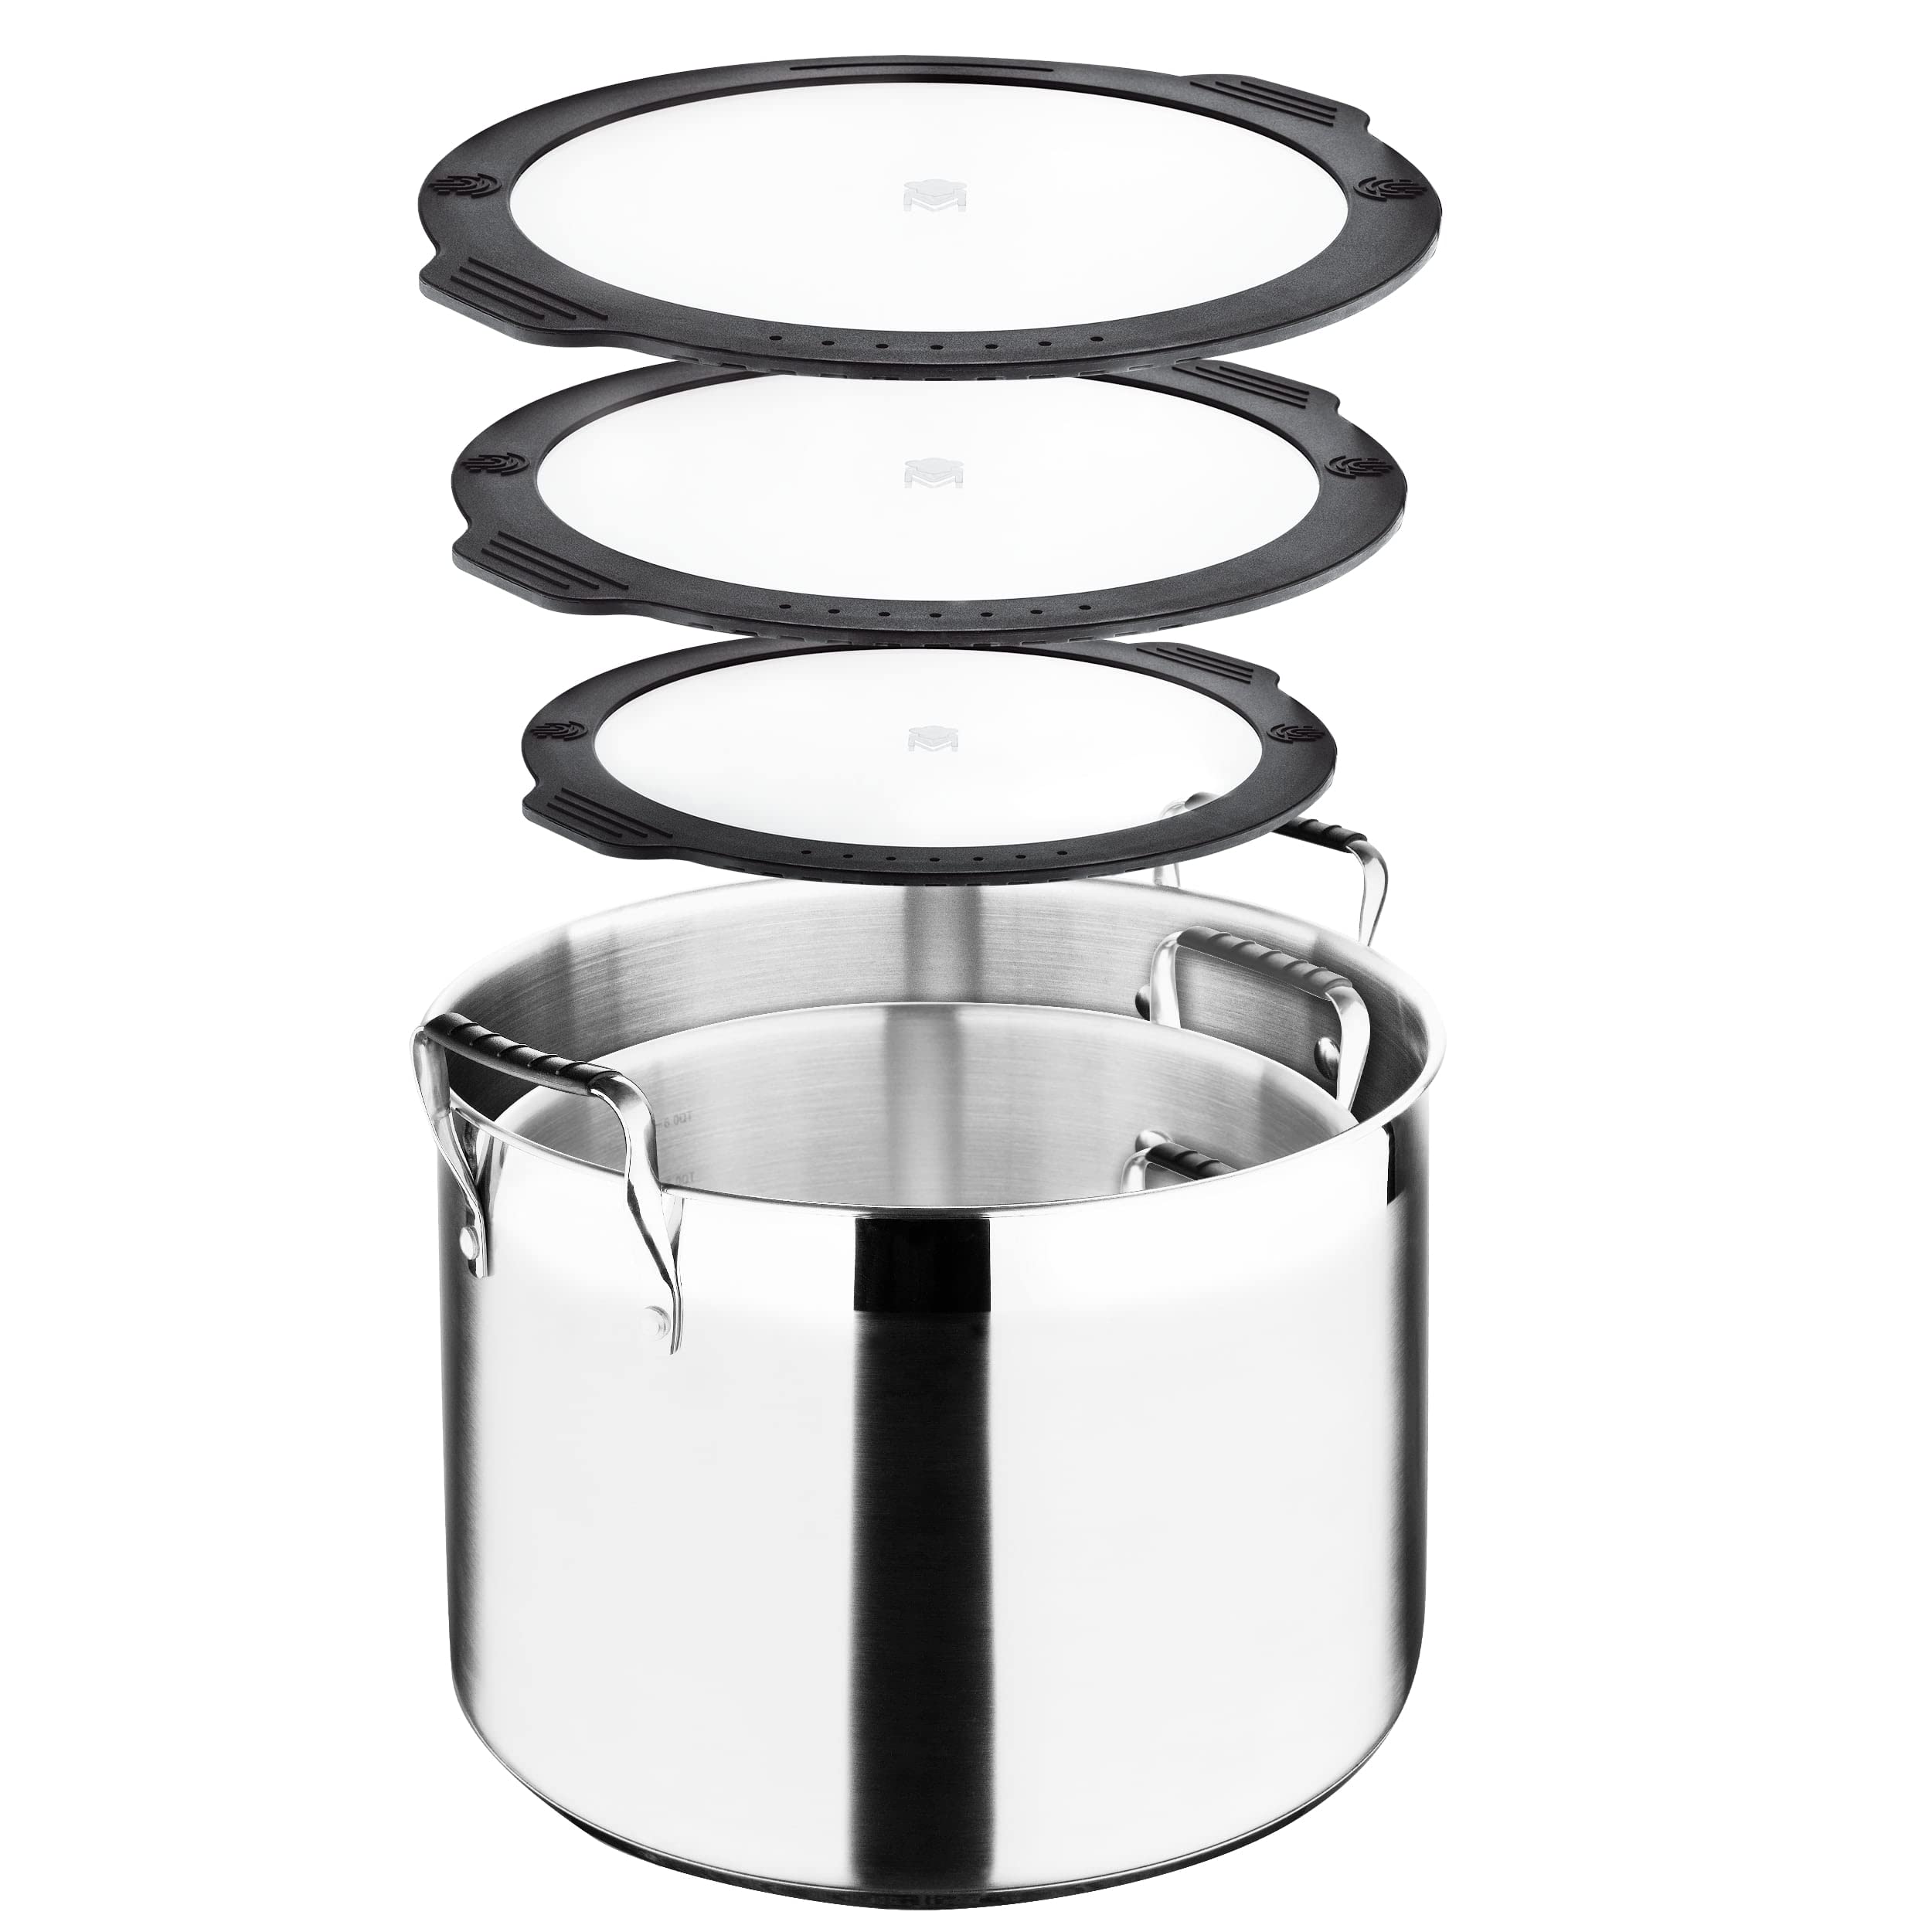 MasterPRO - Smart - Nesting Stainless Steel Collection - 3 Piece Stock Pot Set – 13.2 Quart, 7.3 Quart, 3.6 Quart - Safe for All Stove Types - Fast Heating - Tempered Glass Flat Lid